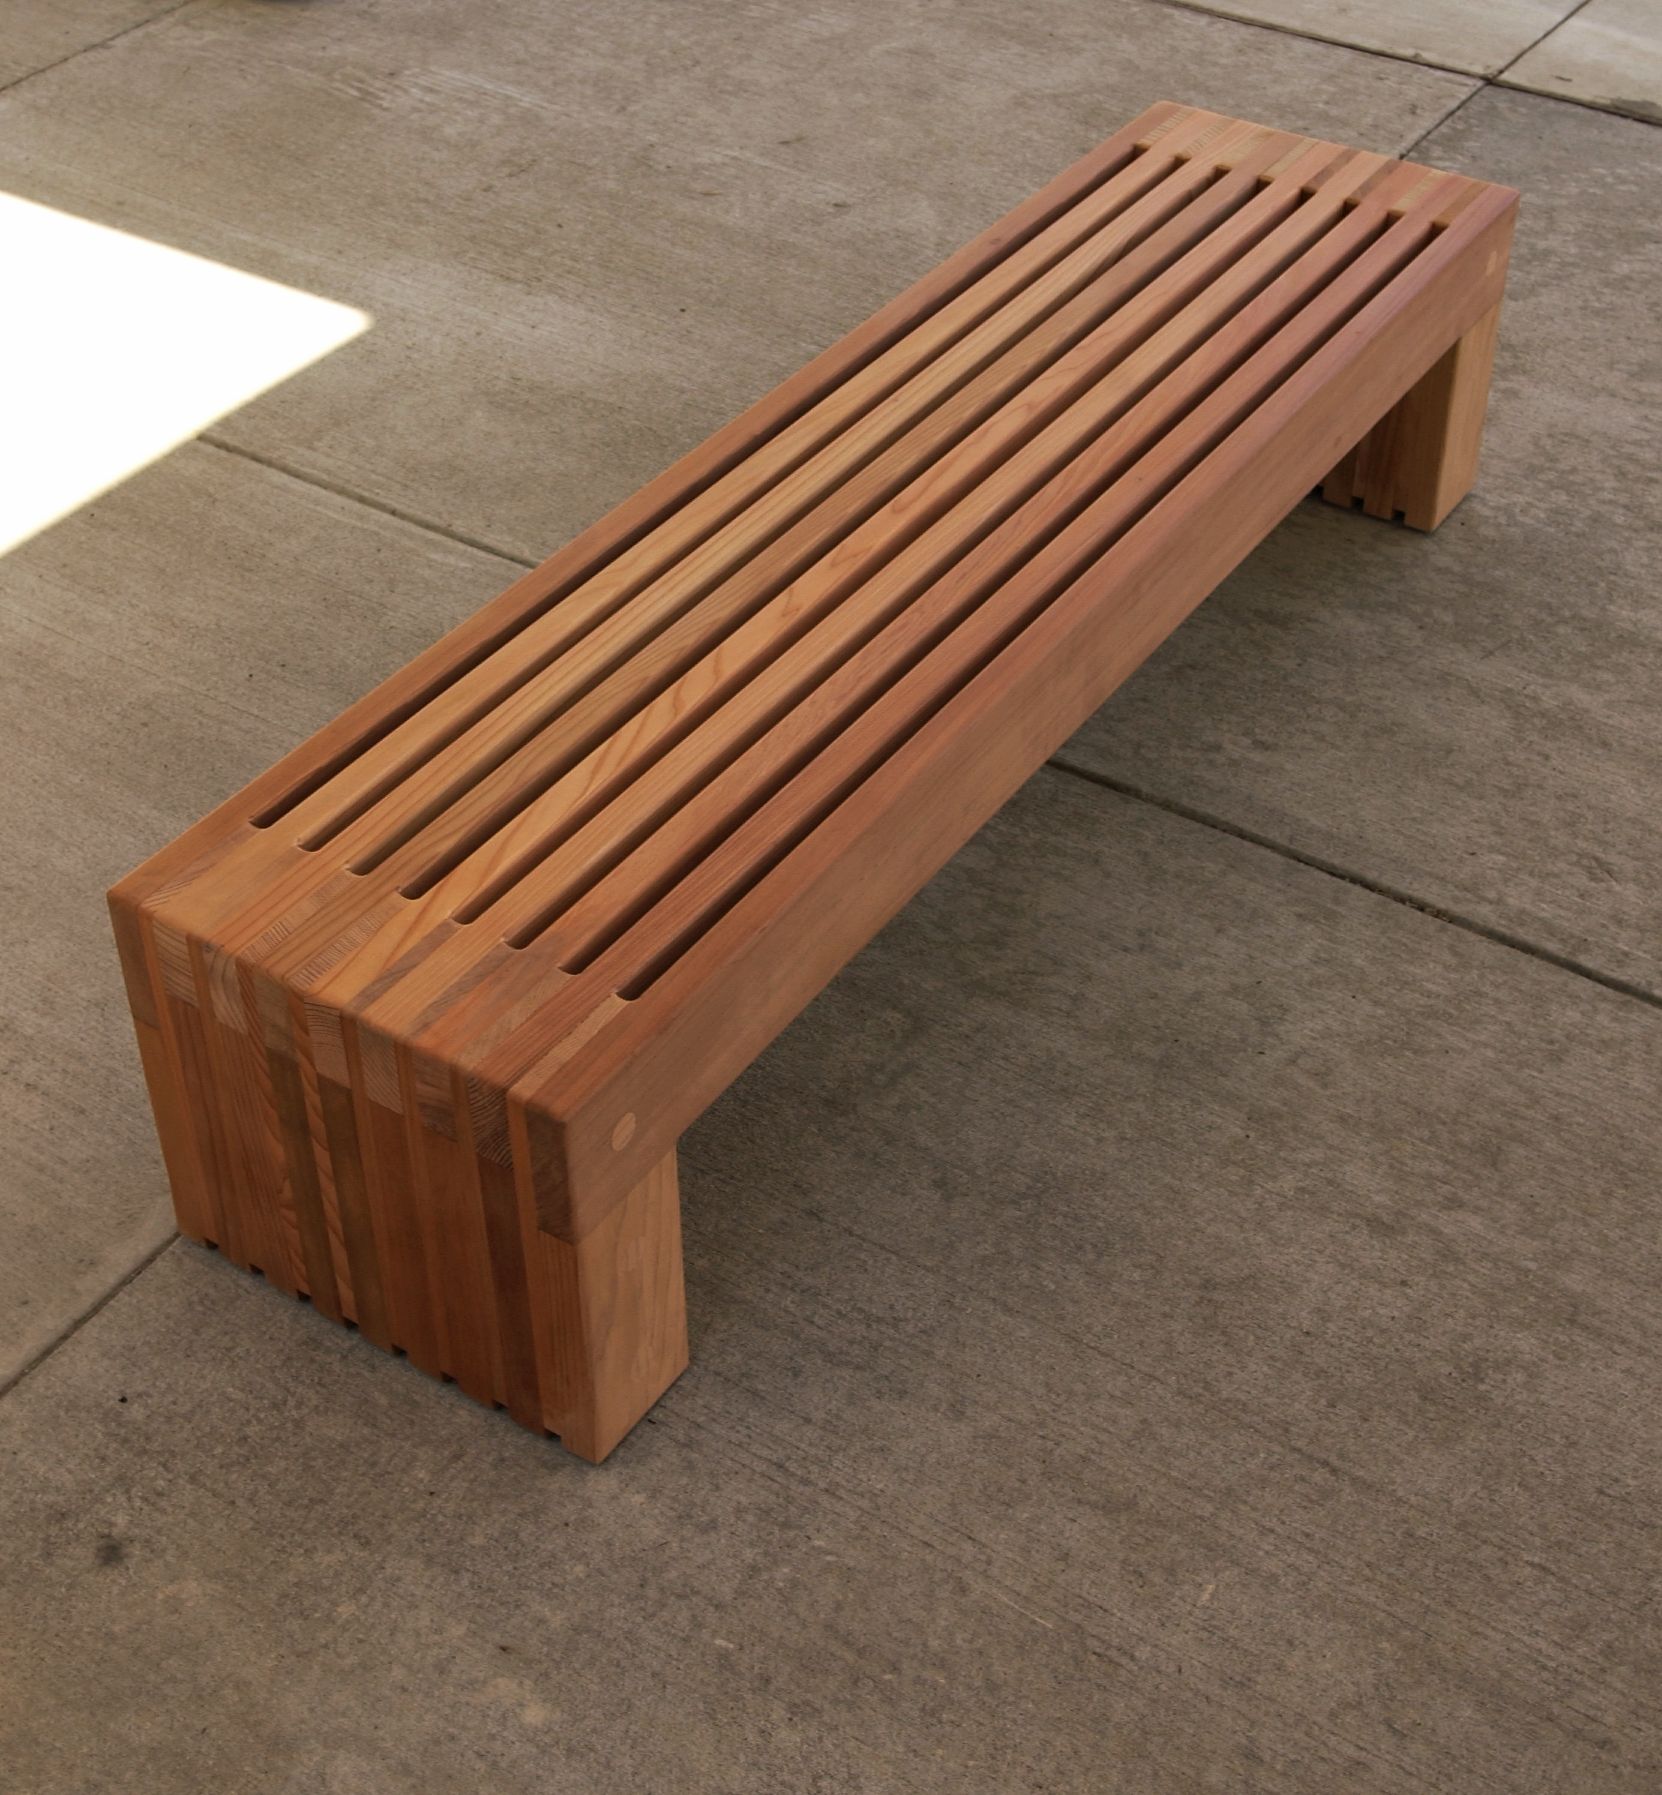 Wood benches photo